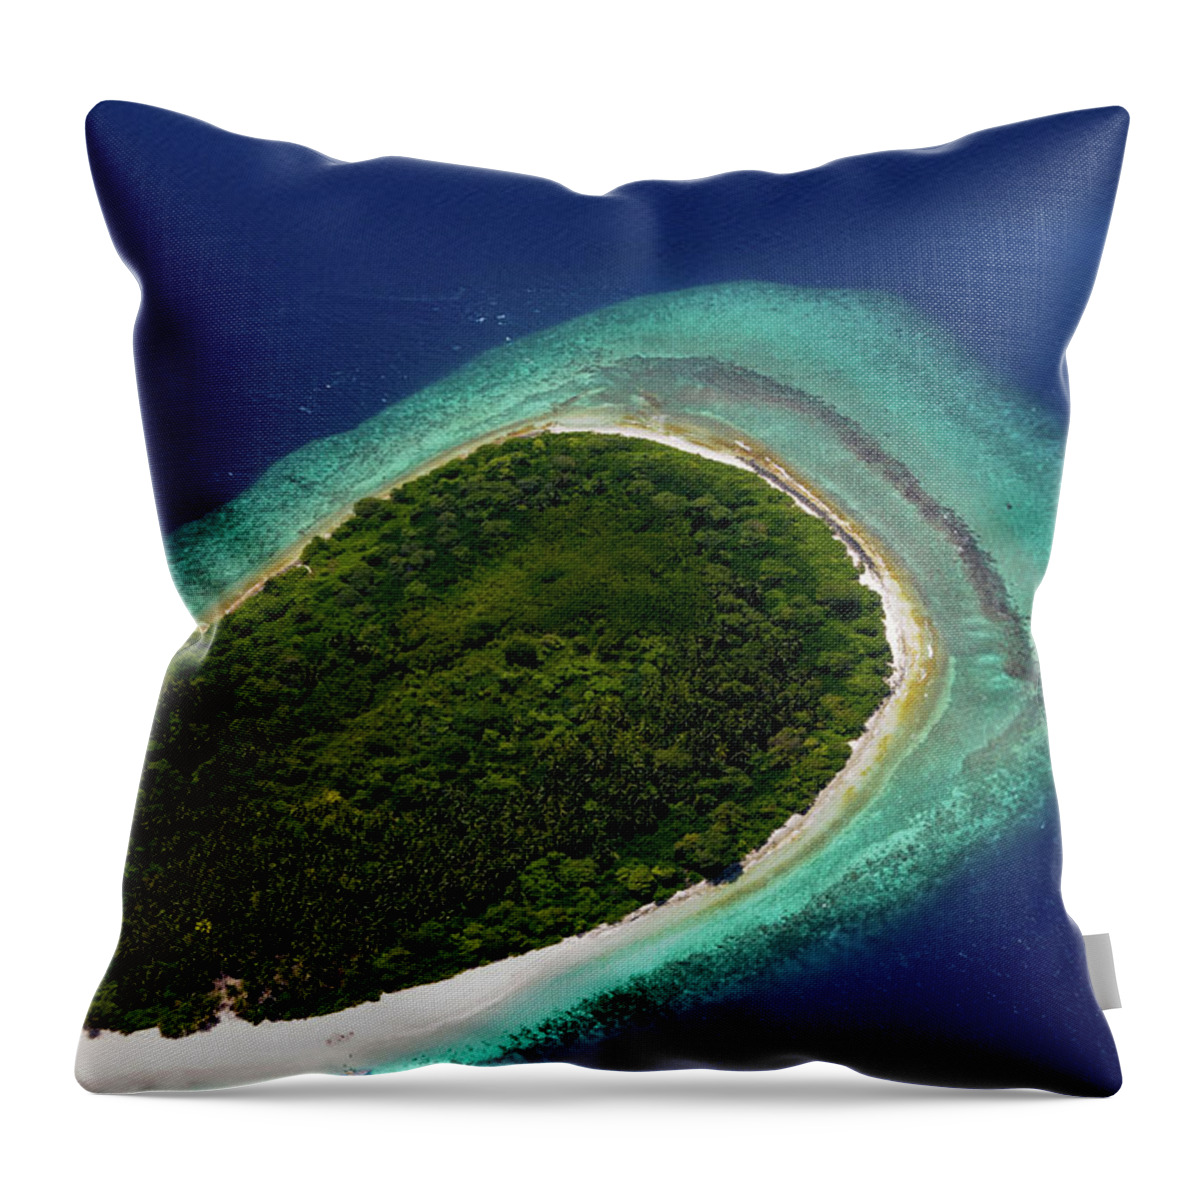 Island Throw Pillow featuring the photograph Aerial View of Deserted Island. Maldives by Jenny Rainbow